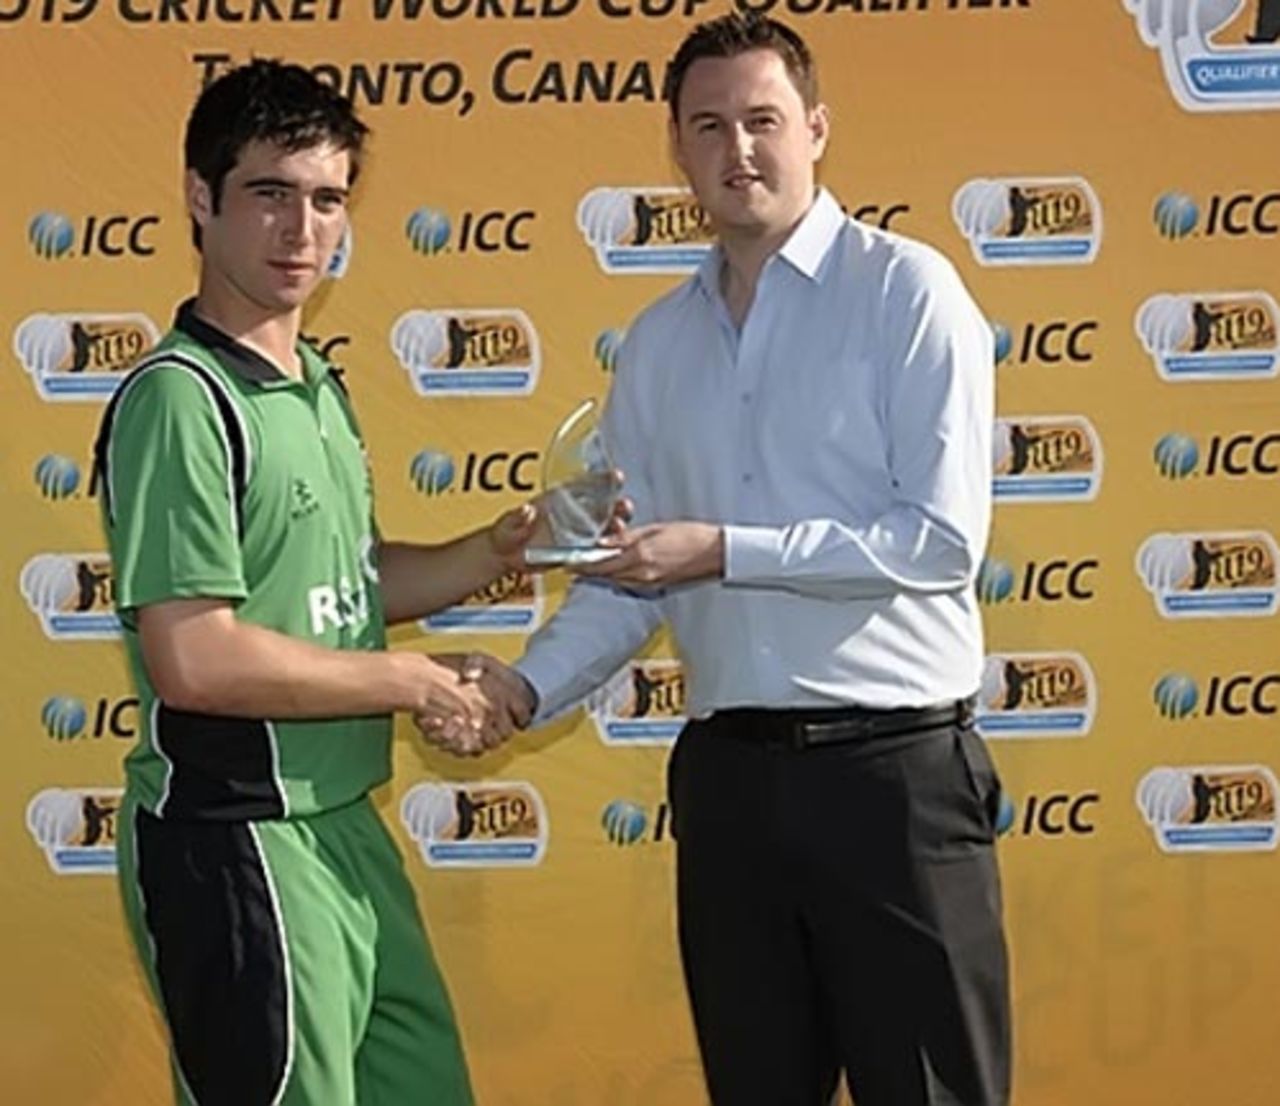 Andrew Balbirnie receives the Man-of-the-Match award, Ireland Under-19s v Afghanistan Under-19s, ICC Under-19 World Cup Qualifier, King City, September 3, 2009